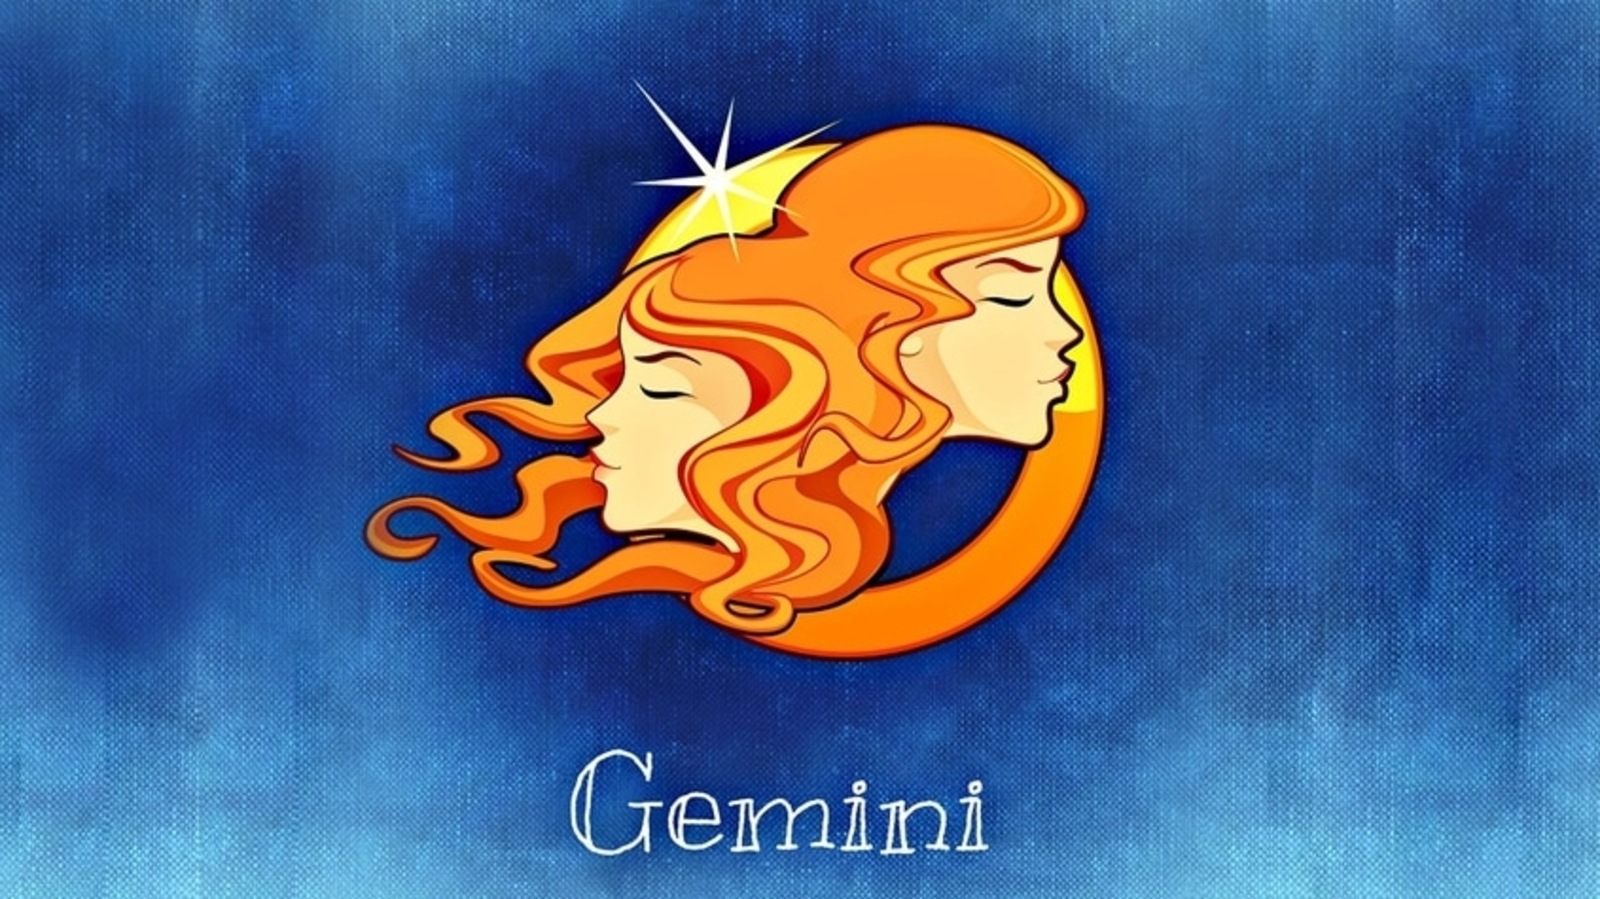 Gemini Daily Horoscope Astrological Prediction for August 29